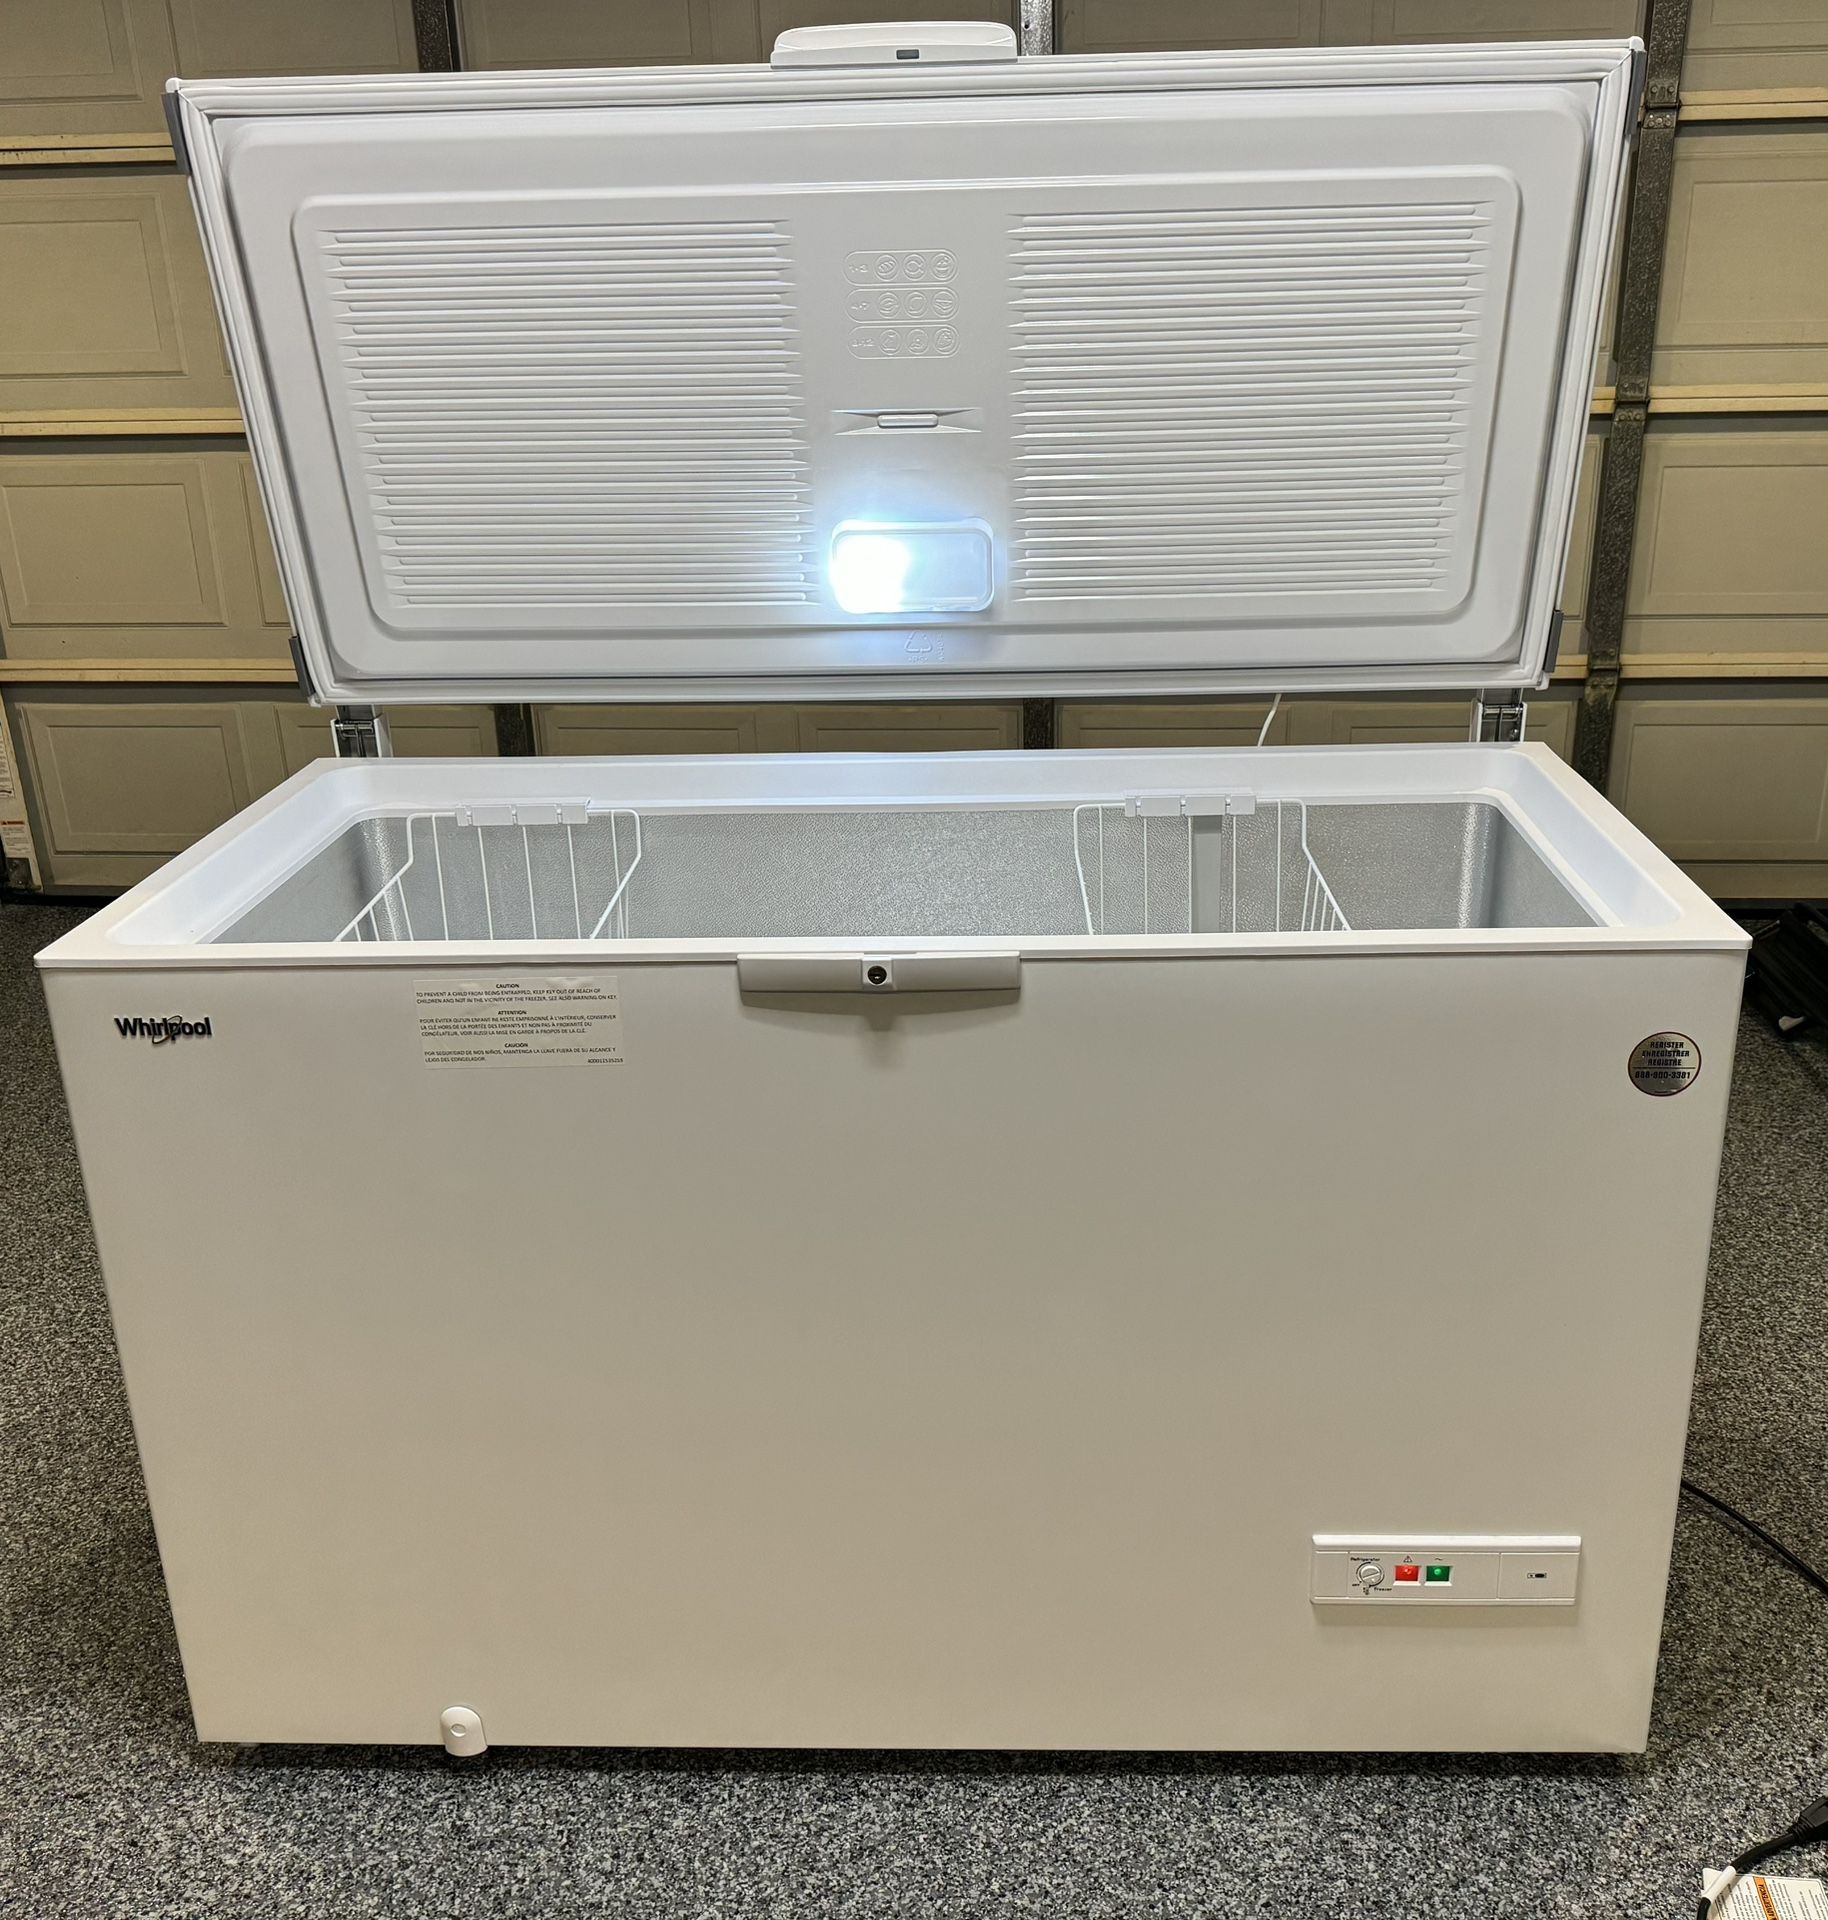 Brand New Whirlpool 16 Cu. Ft. Convertible Chest Freezer Available! $475 